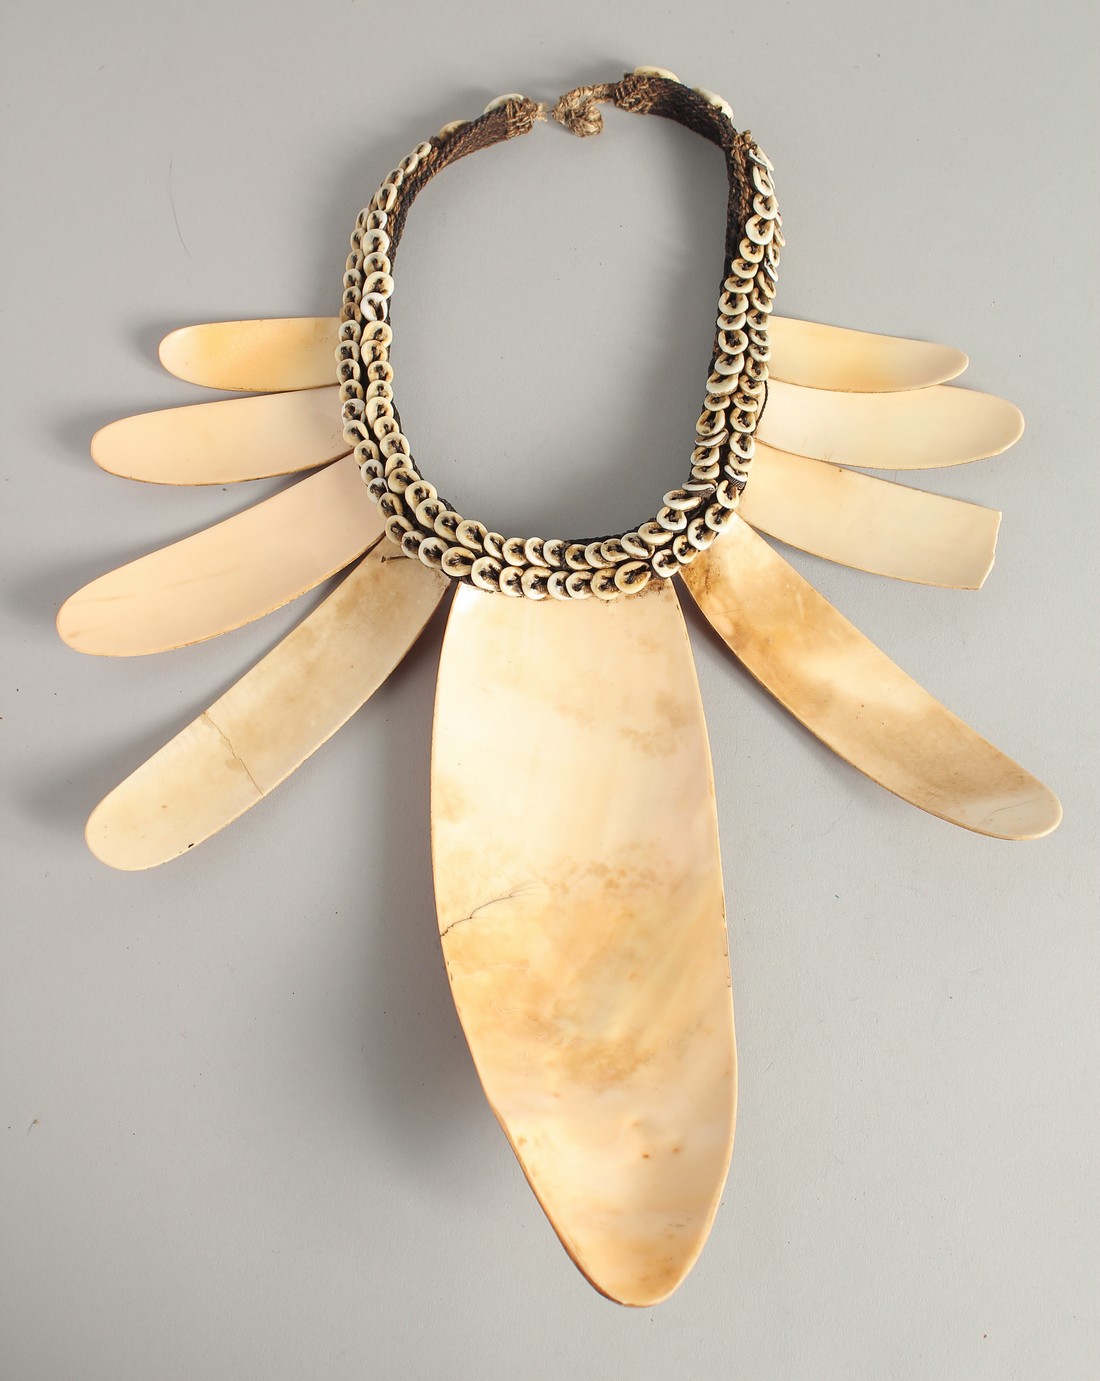 A PACIFIC ISLANDS SHELL PECKERY (NECKLACE).